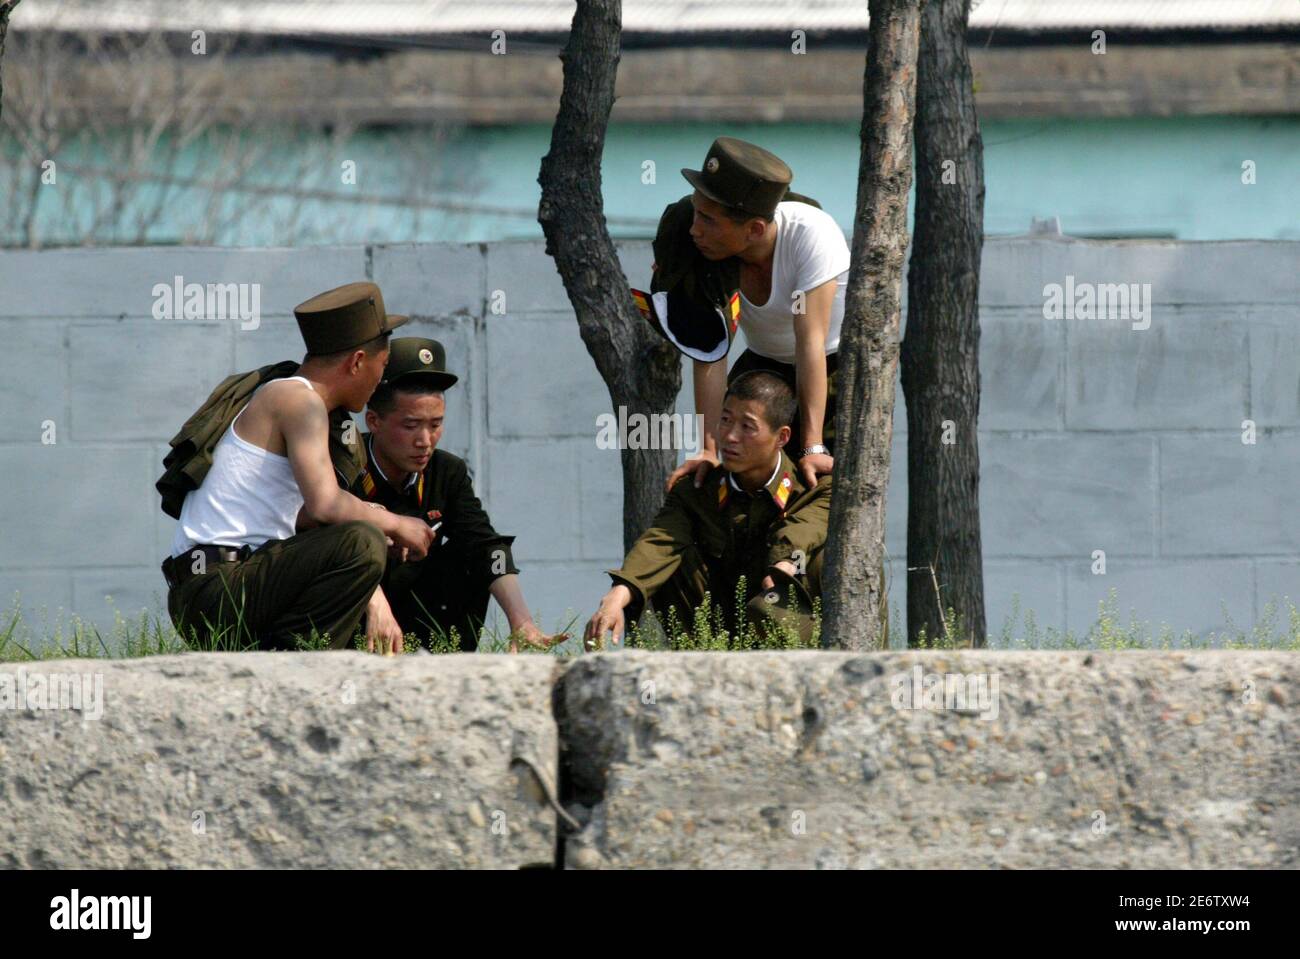 North Korean soldiers chat on the banks of the Yalu River near the North Korean town of Sinuiju, opposite the Chinese border city of Dandong, May 27, 2009.  North Korea on Wednesday threatened a military strike against the South a day after Seoul joined a U.S.-led initiative to intercept shipments suspected of being involved in weapons of mass destruction. REUTERS/Jacky Chen (POLITICS MILITARY) Stock Photo